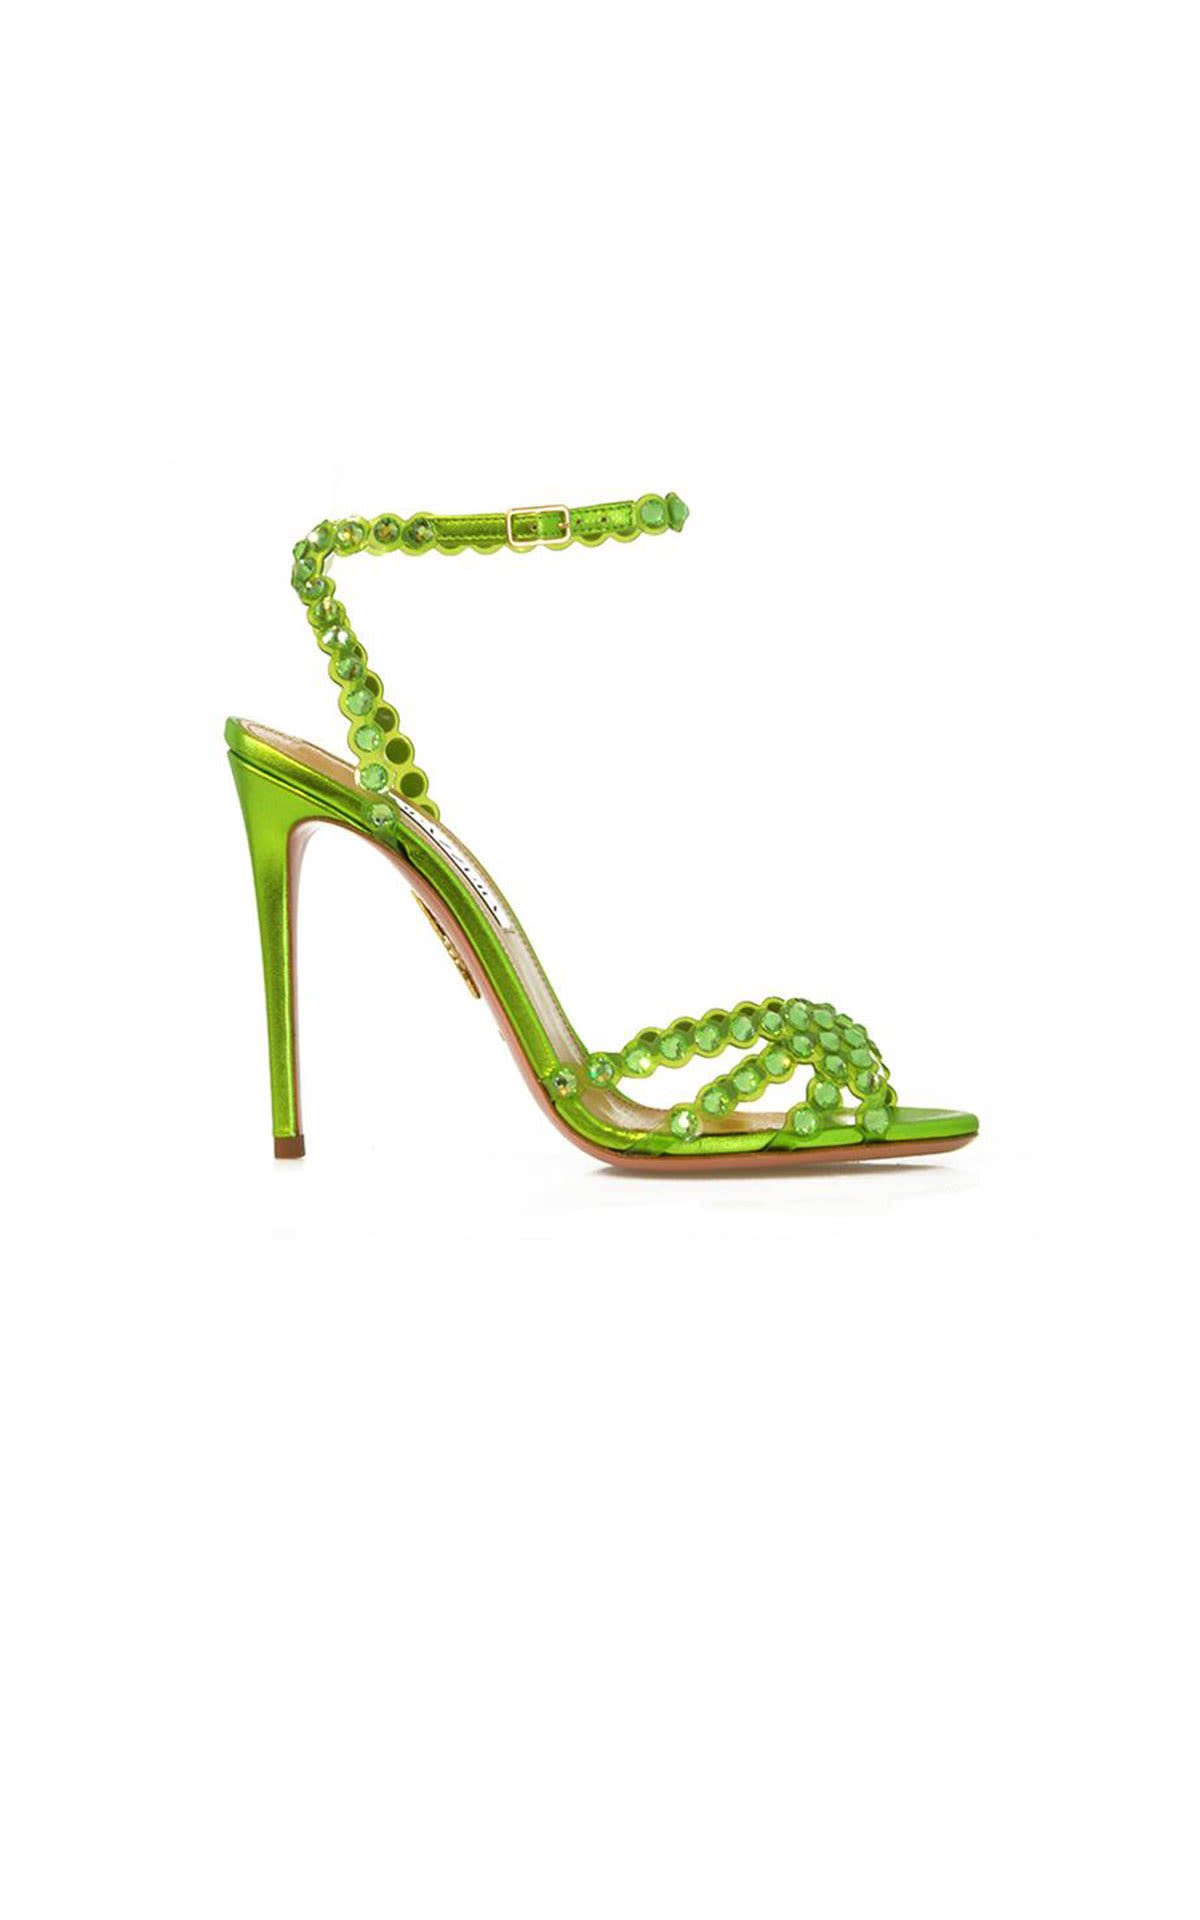 Aquazzura Tequila sandal 105 lime from Bicester Village